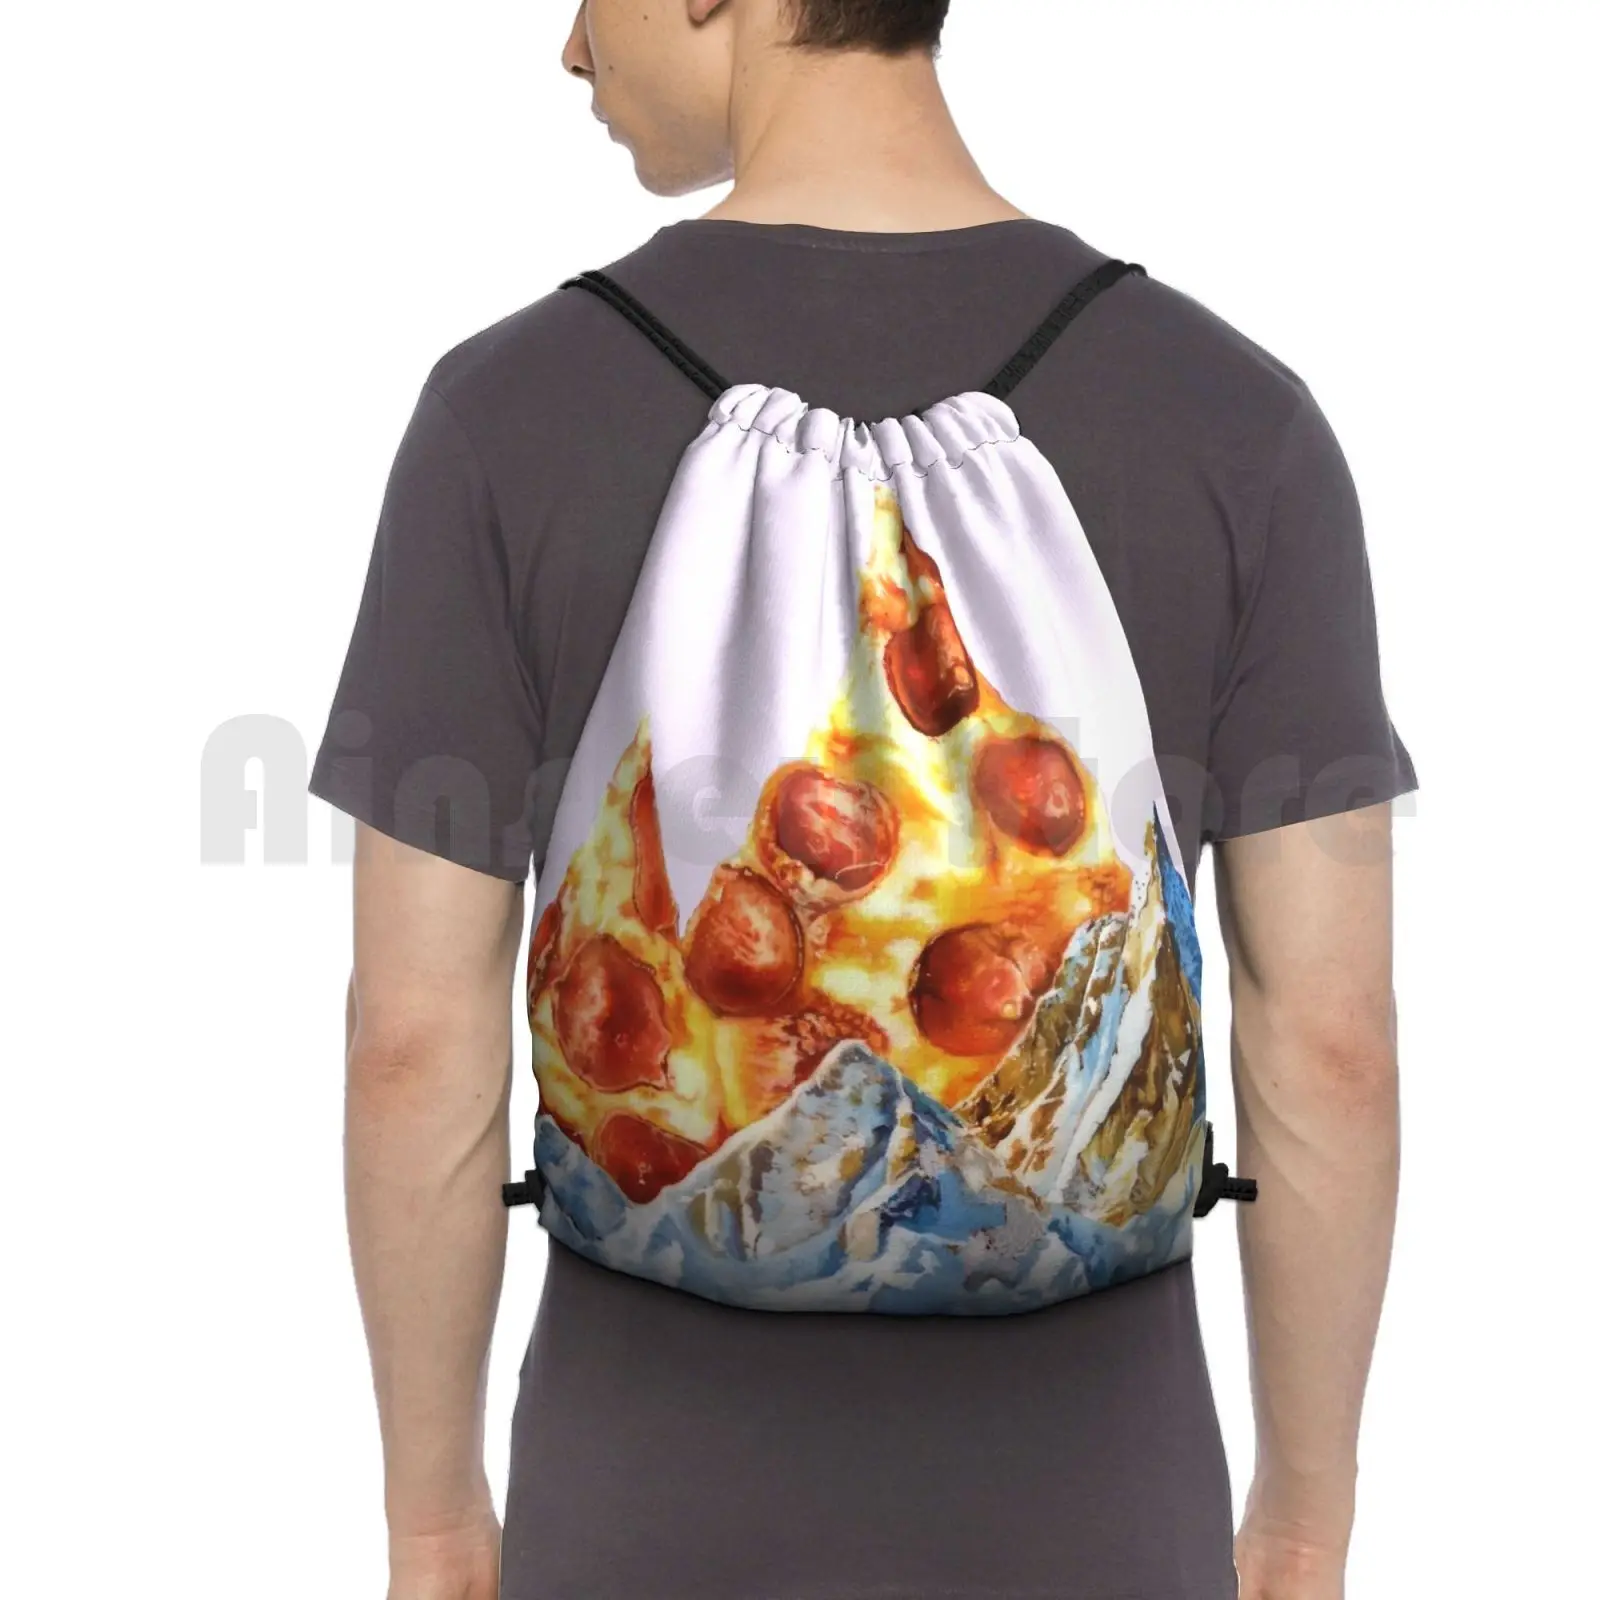 

Pepperoni Pizza Peaks Backpack Drawstring Bag Riding Climbing Gym Bag Pizza Mountain Landscape Food Funny Surreal Weird